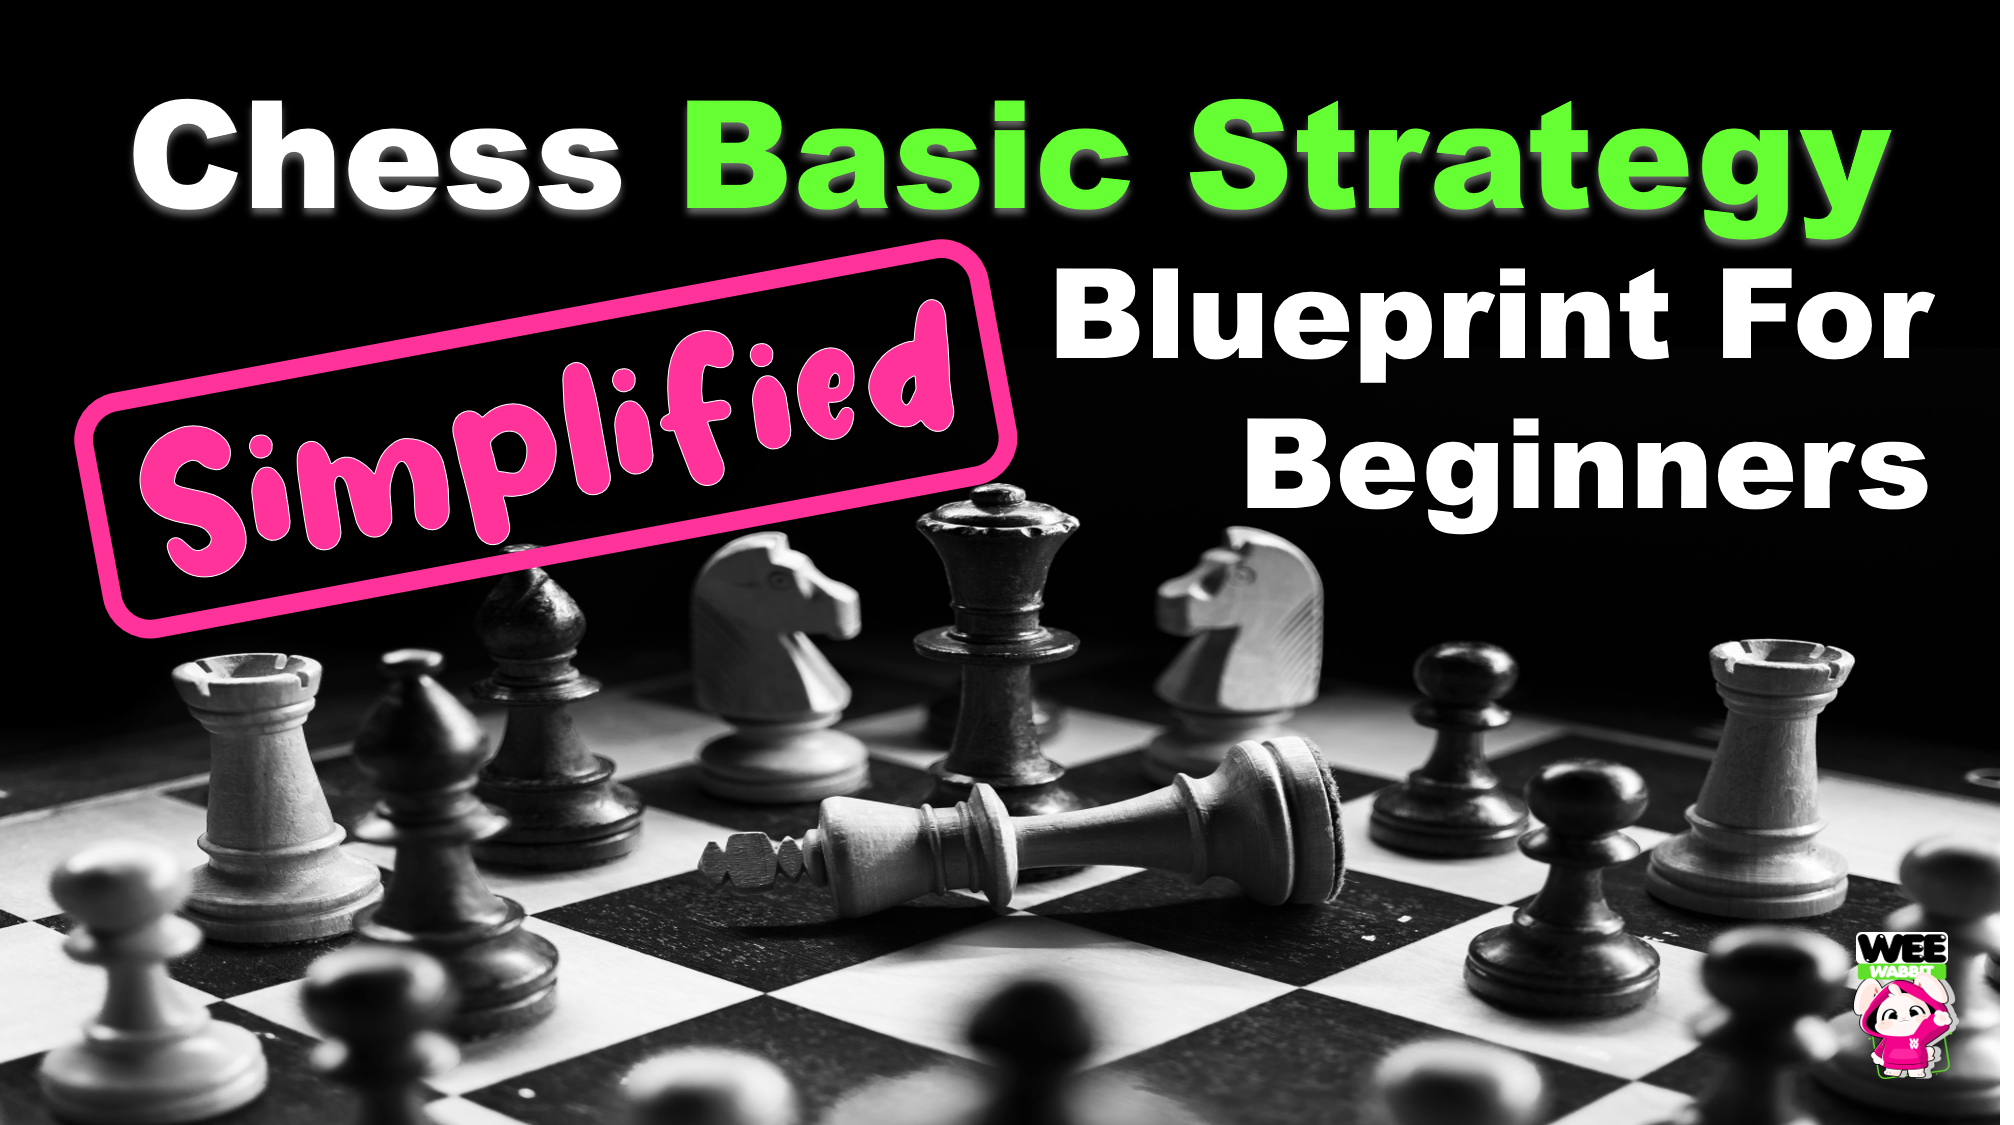 Chess Basic Strategy Blueprint For Beginners Simplified